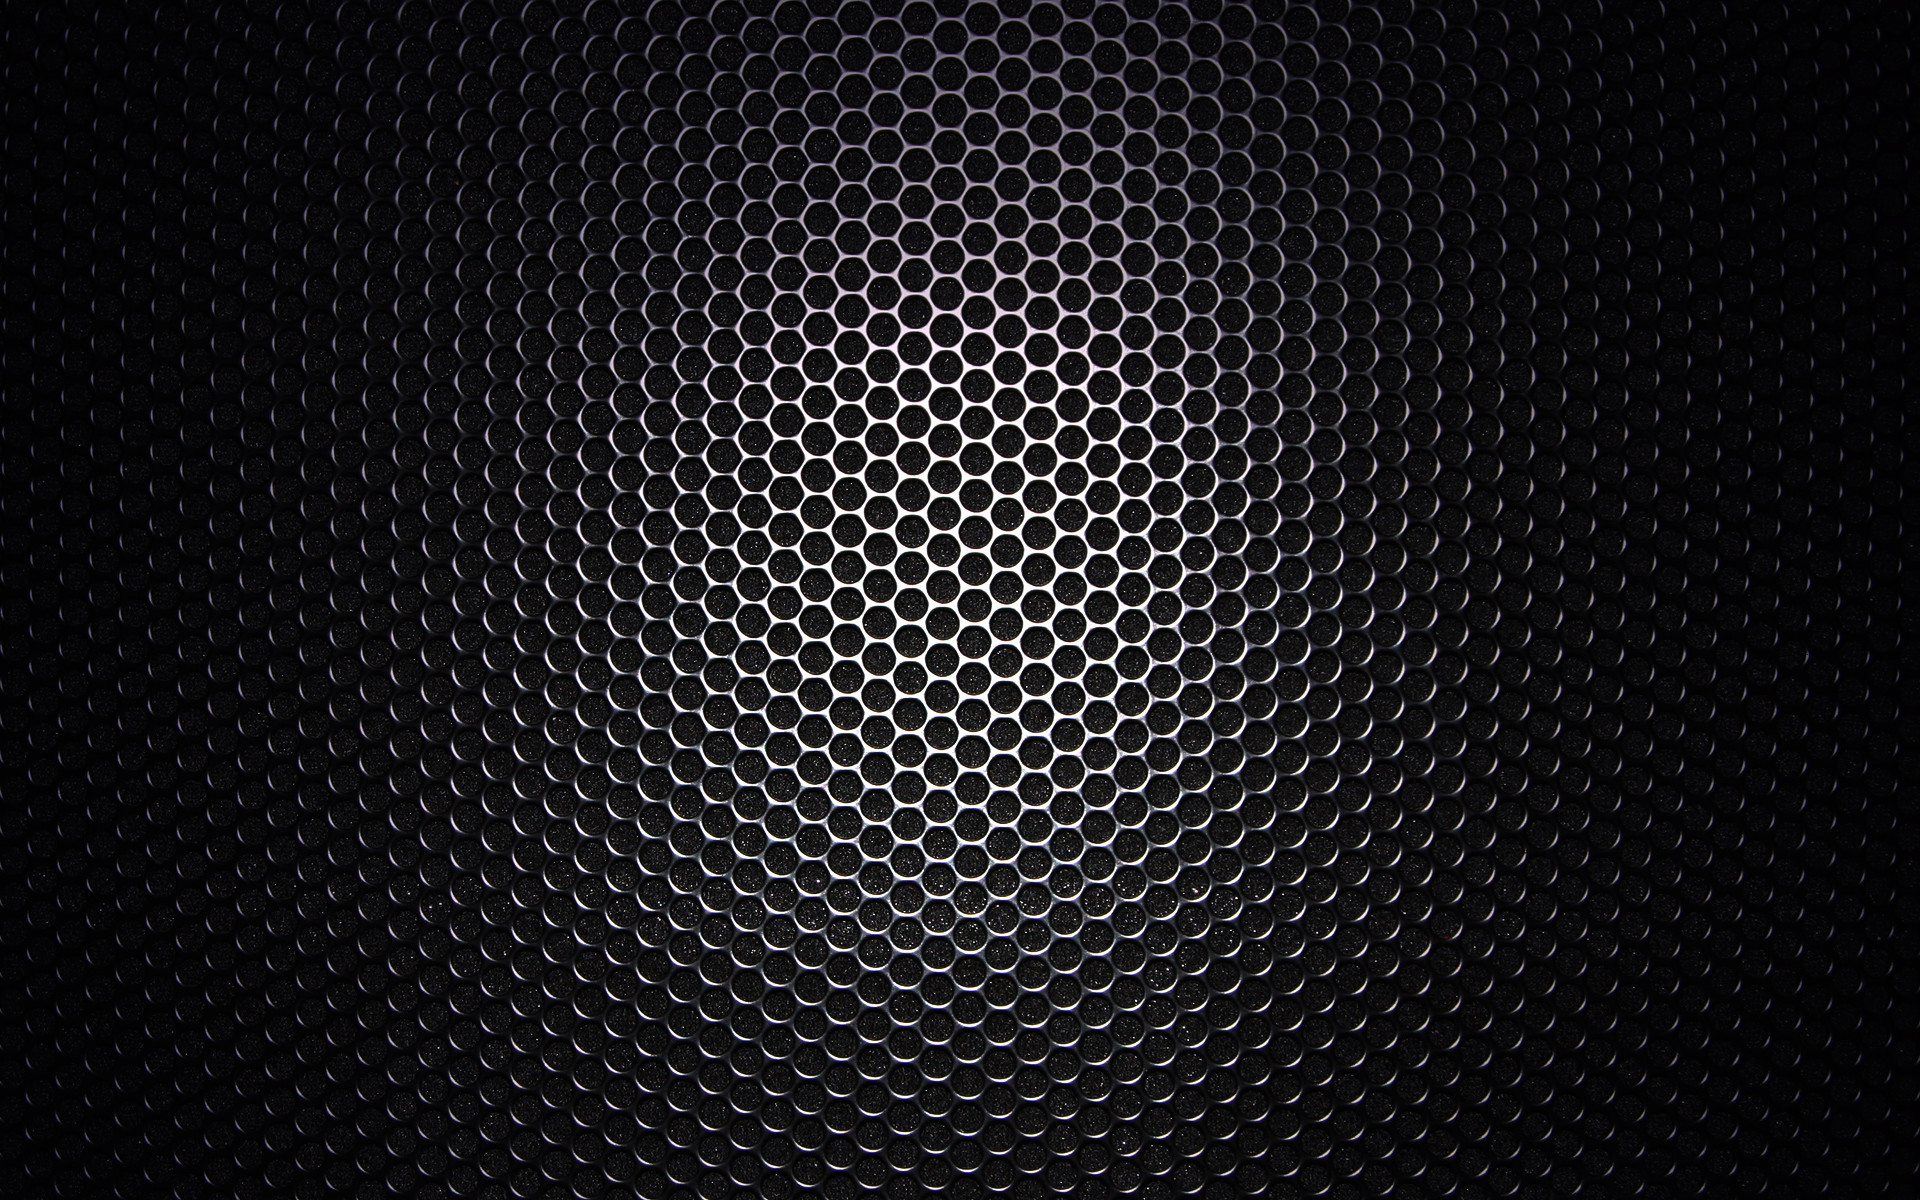 1920x1200 Cool Black Wallpapers - http://wallpaperzoo.com/cool-black-